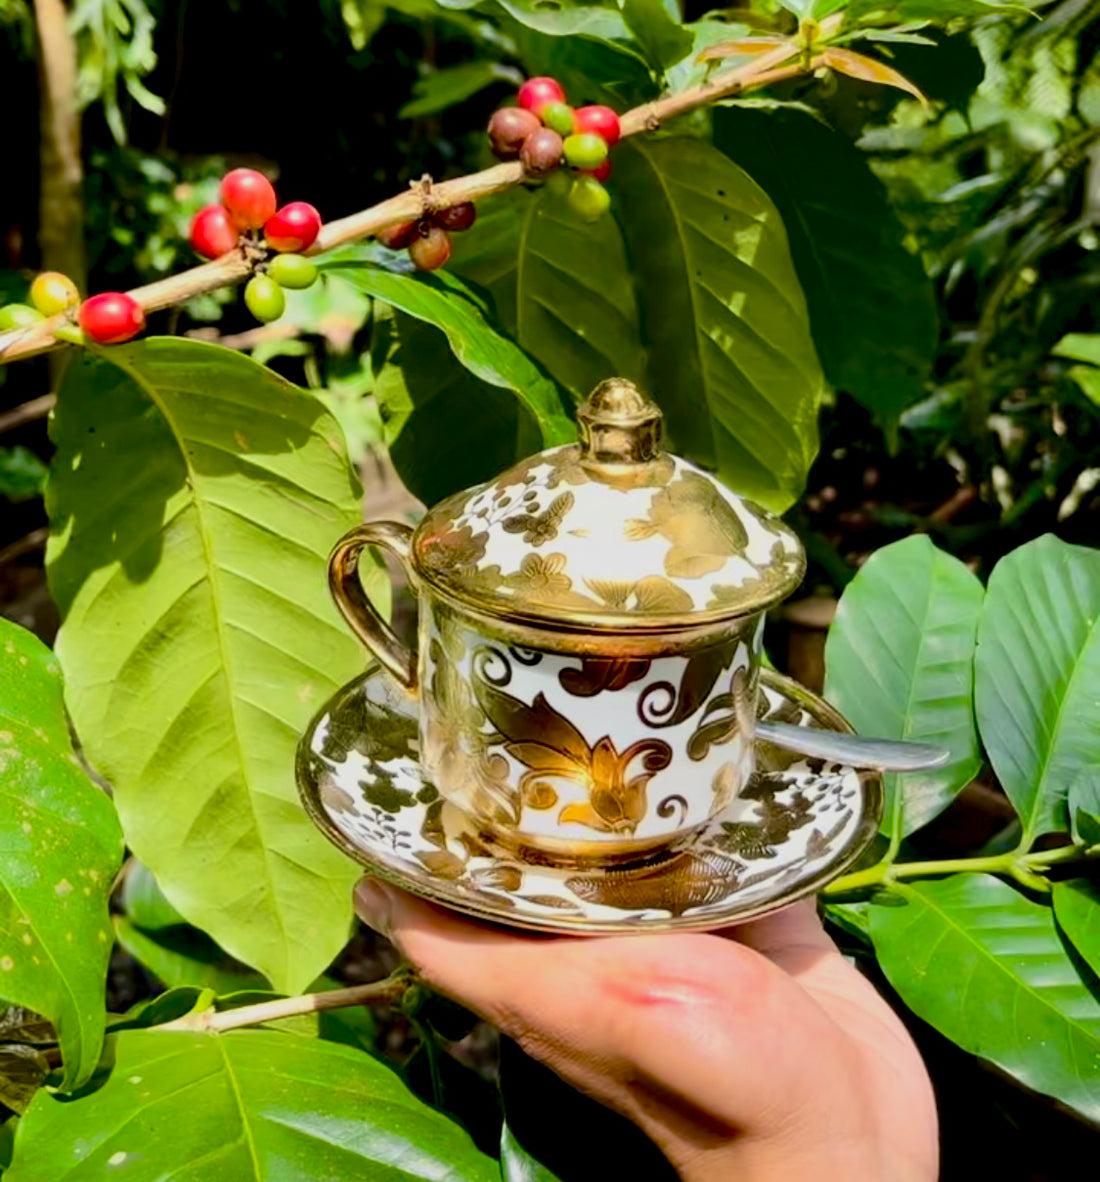 Golden cup used to serve Kopi Luwak at a small "coffee plantation"